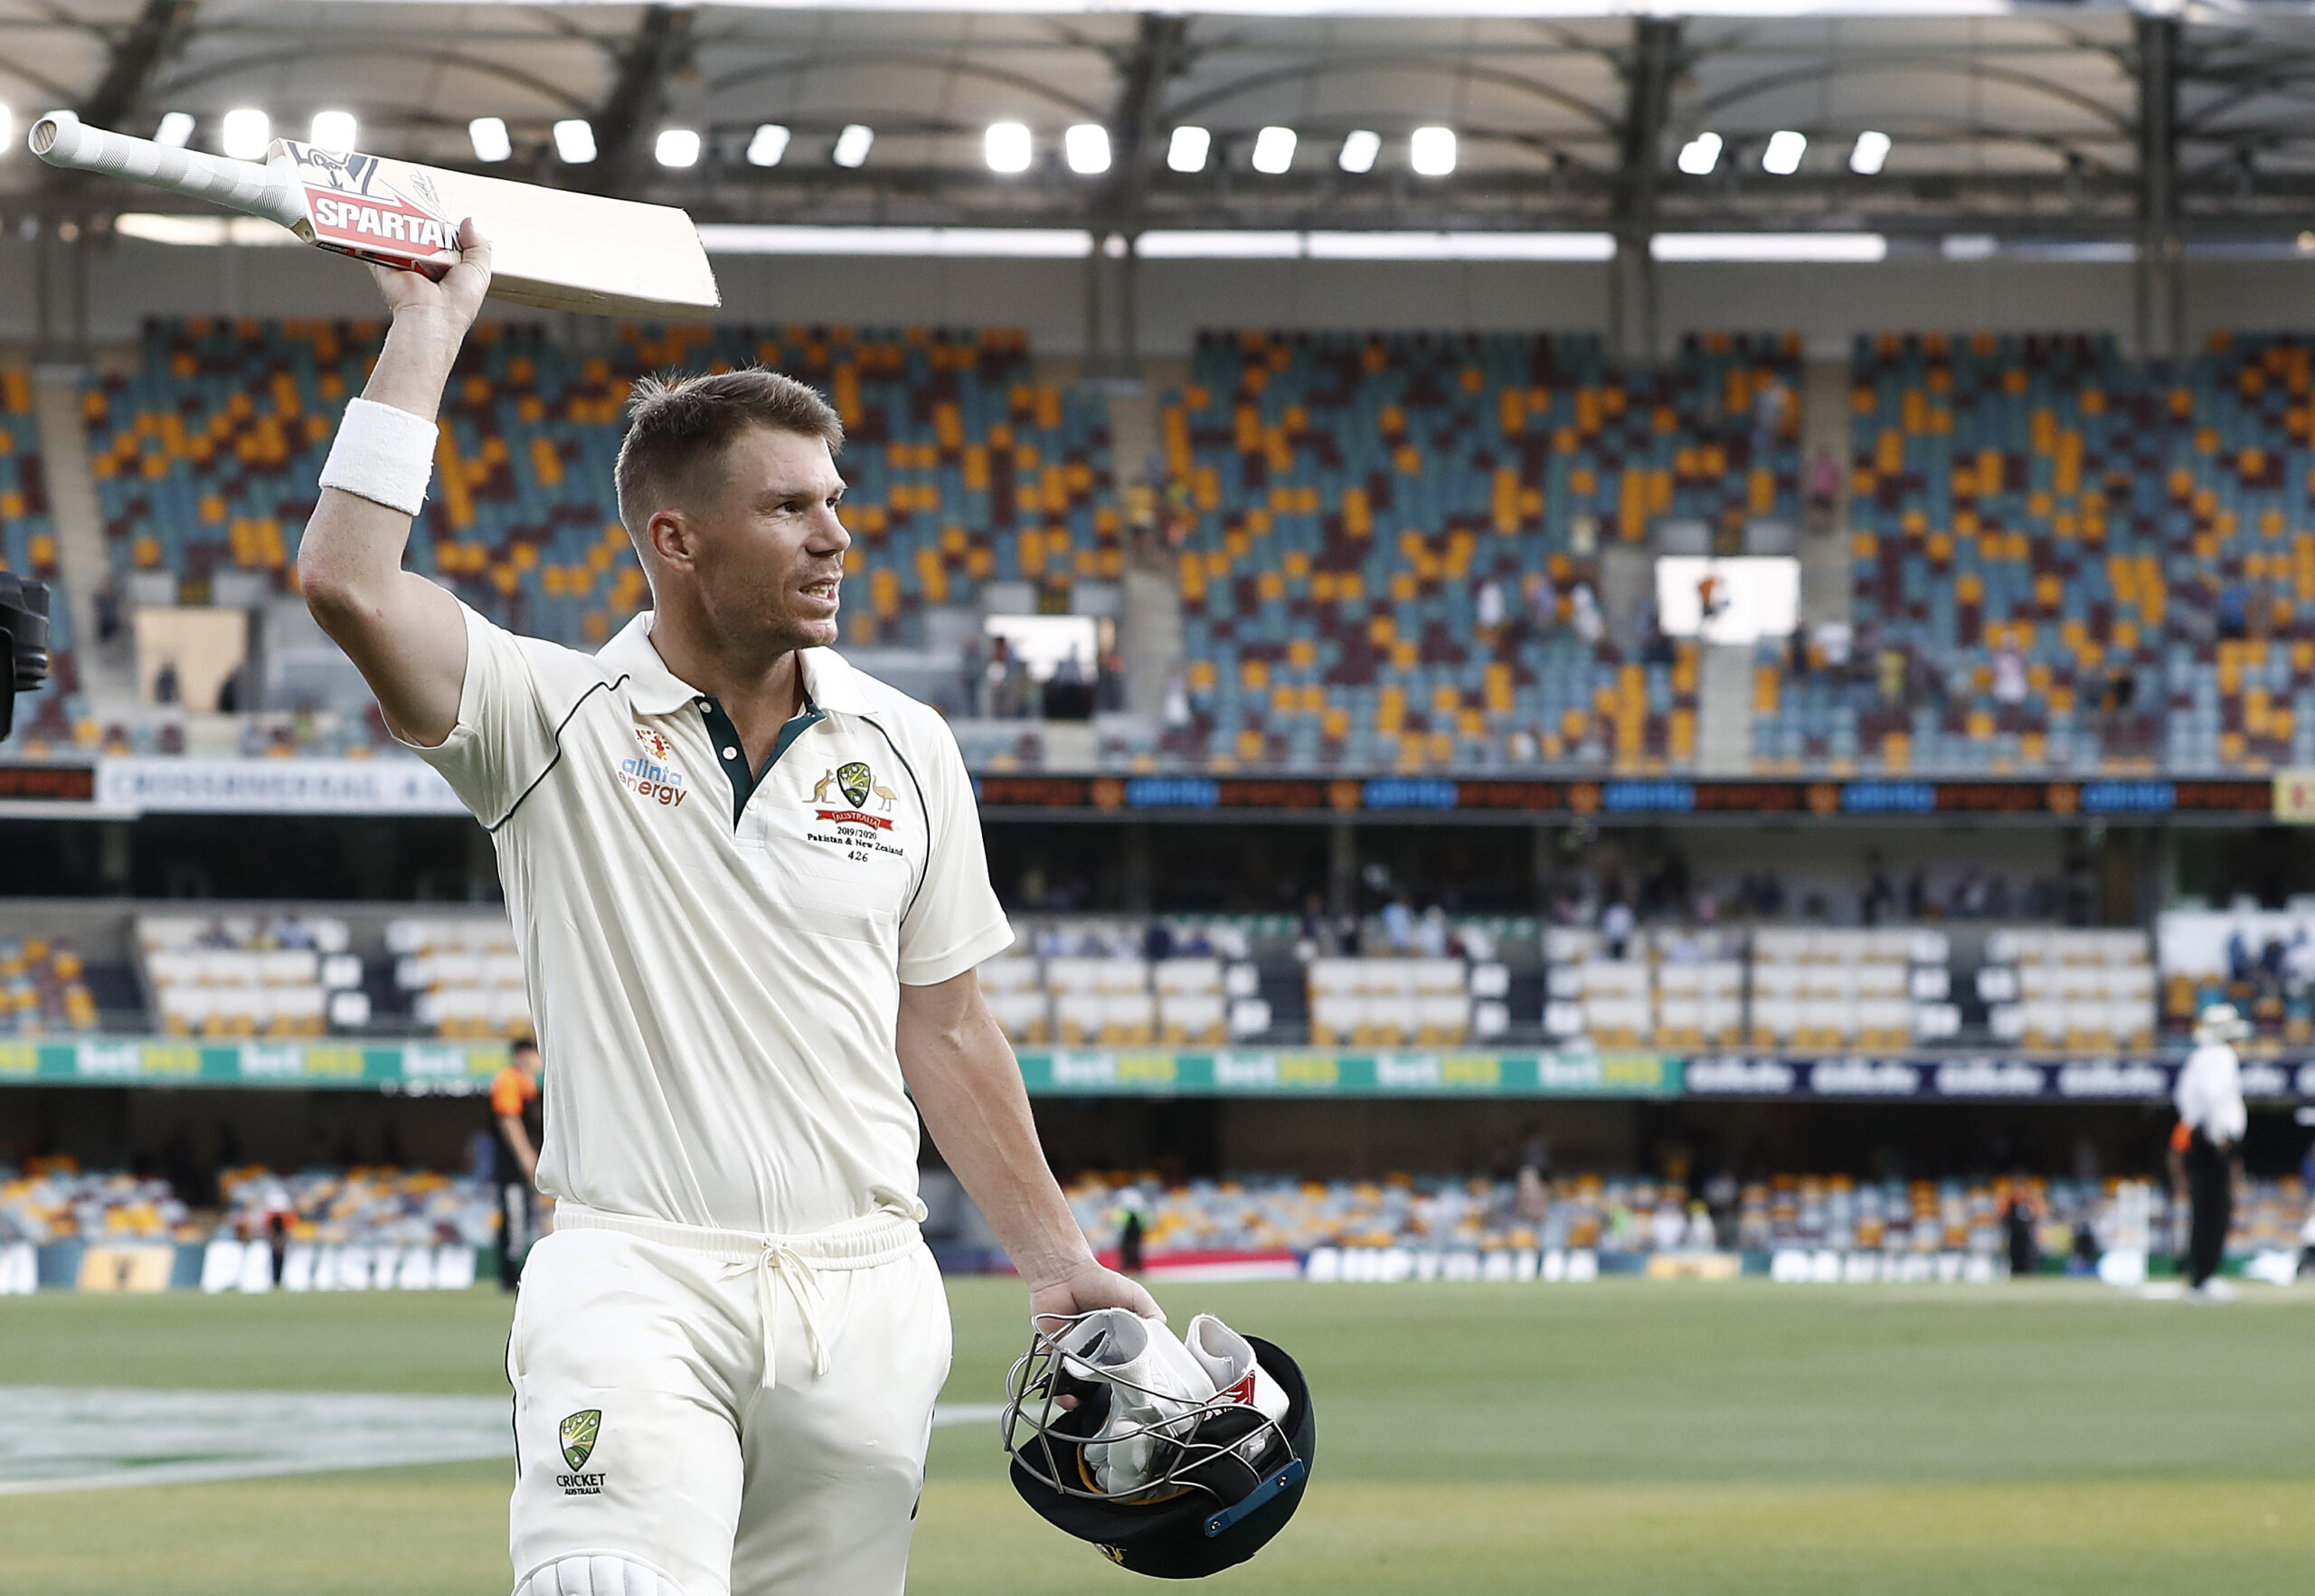 David Warner to Retire From Test Cricket His Wife's Cryptic 'End of an Era'